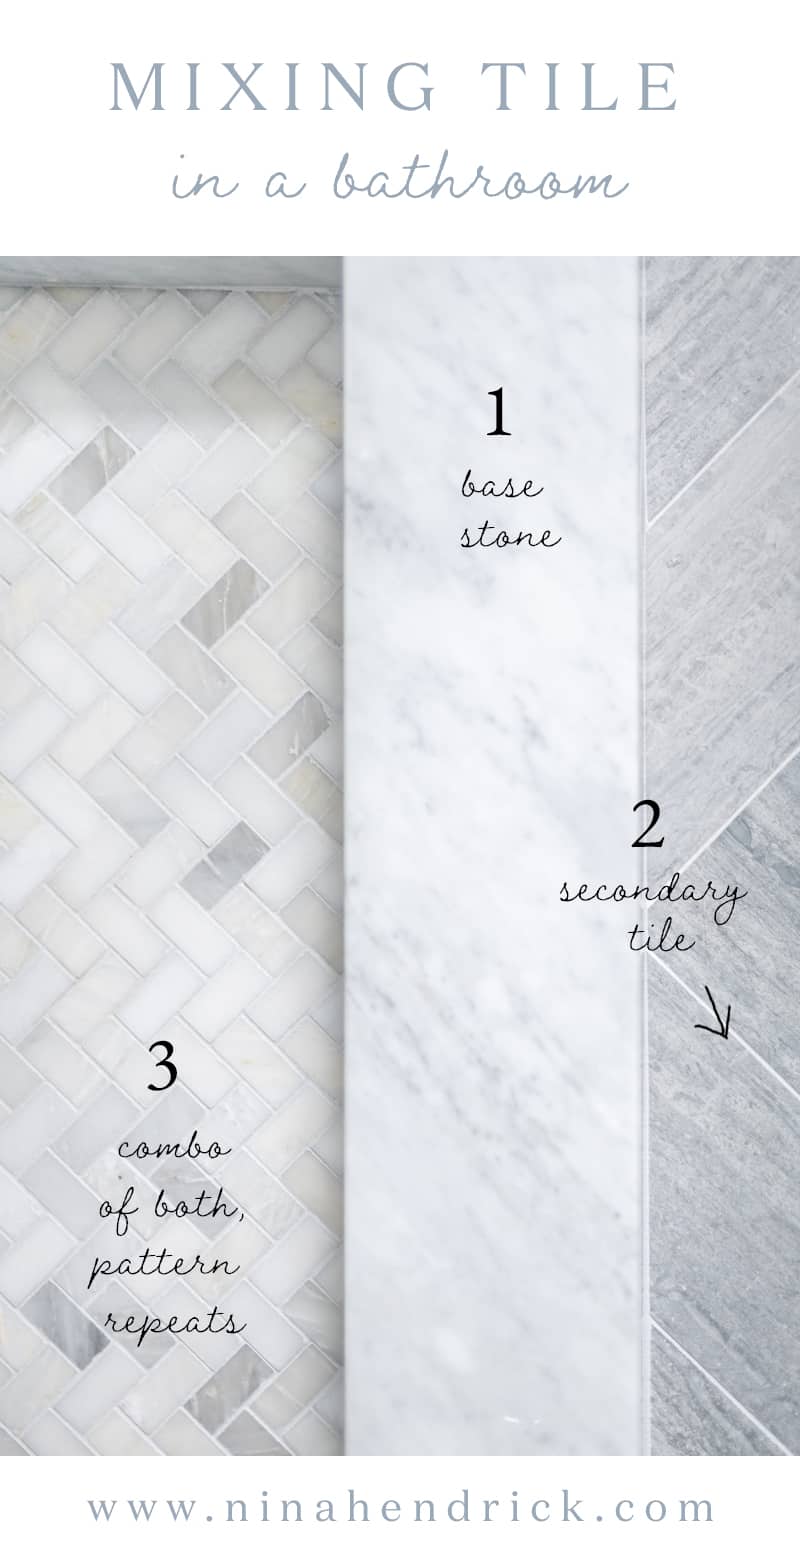 Mixing tiles in a bathroom graphic with steps